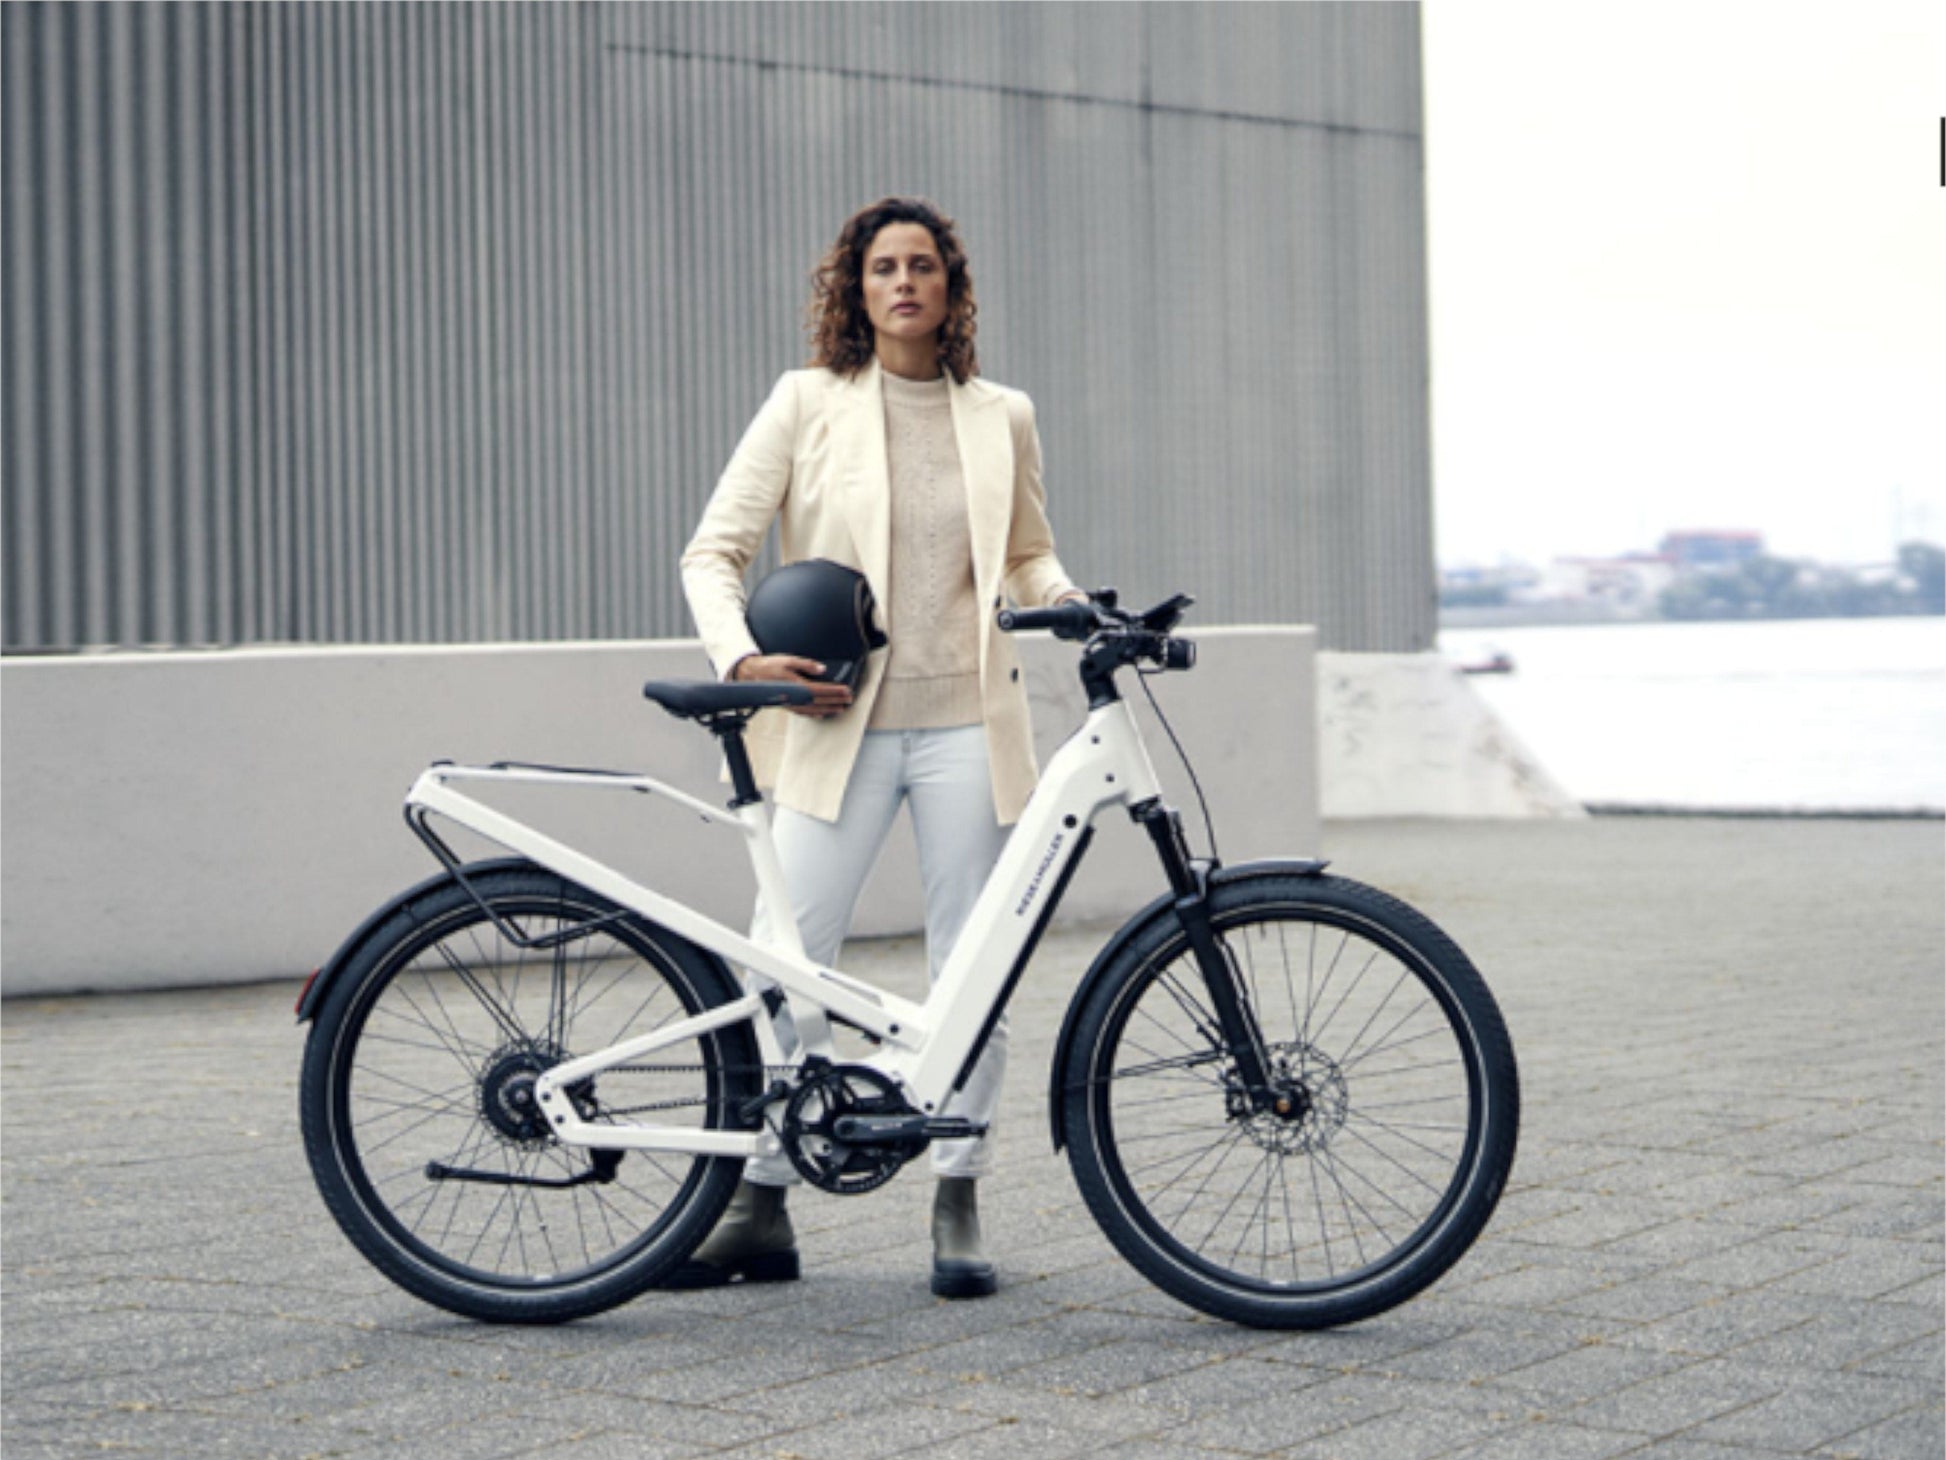 Riese and Muller Homage GT Rohloff ebike pearl white lady standing with bike